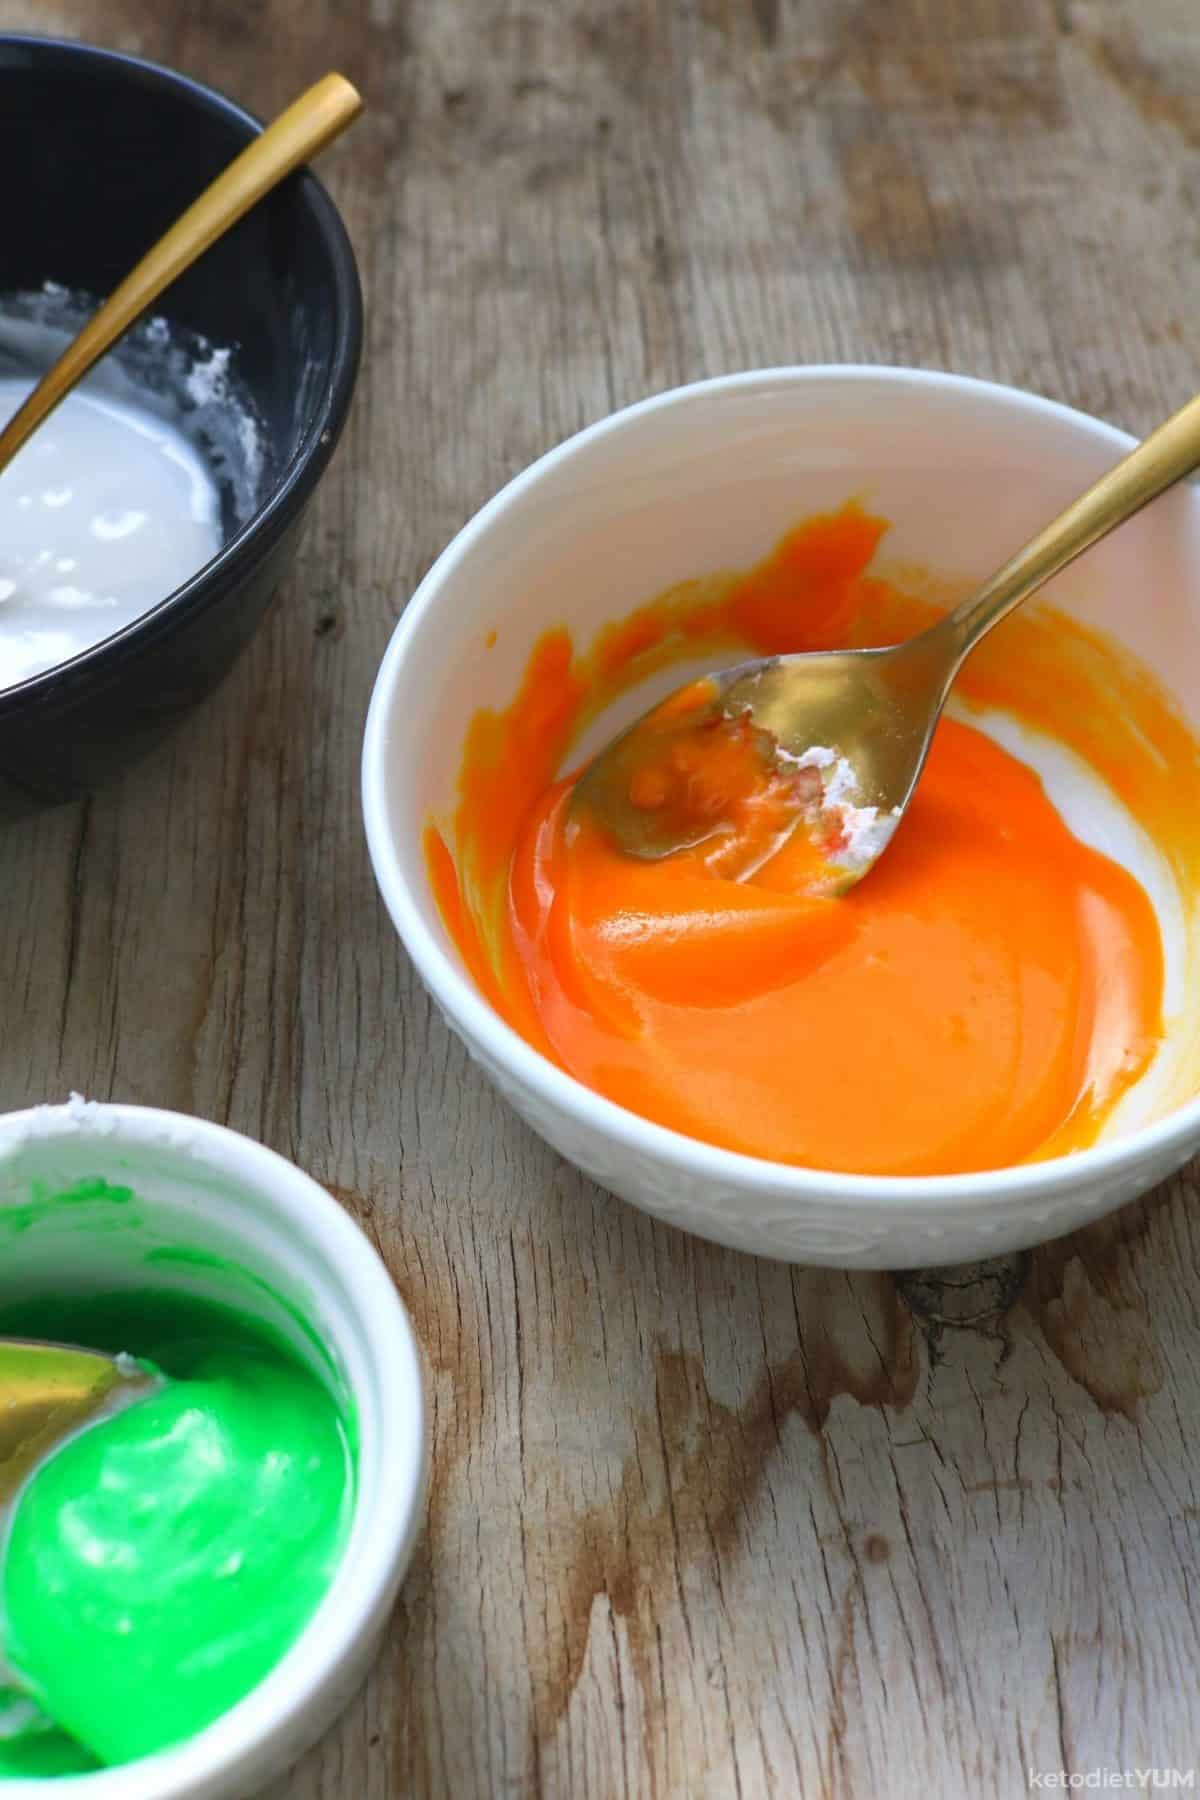 Green, white and orange icing ready to decorate Halloween pumpkin cookies